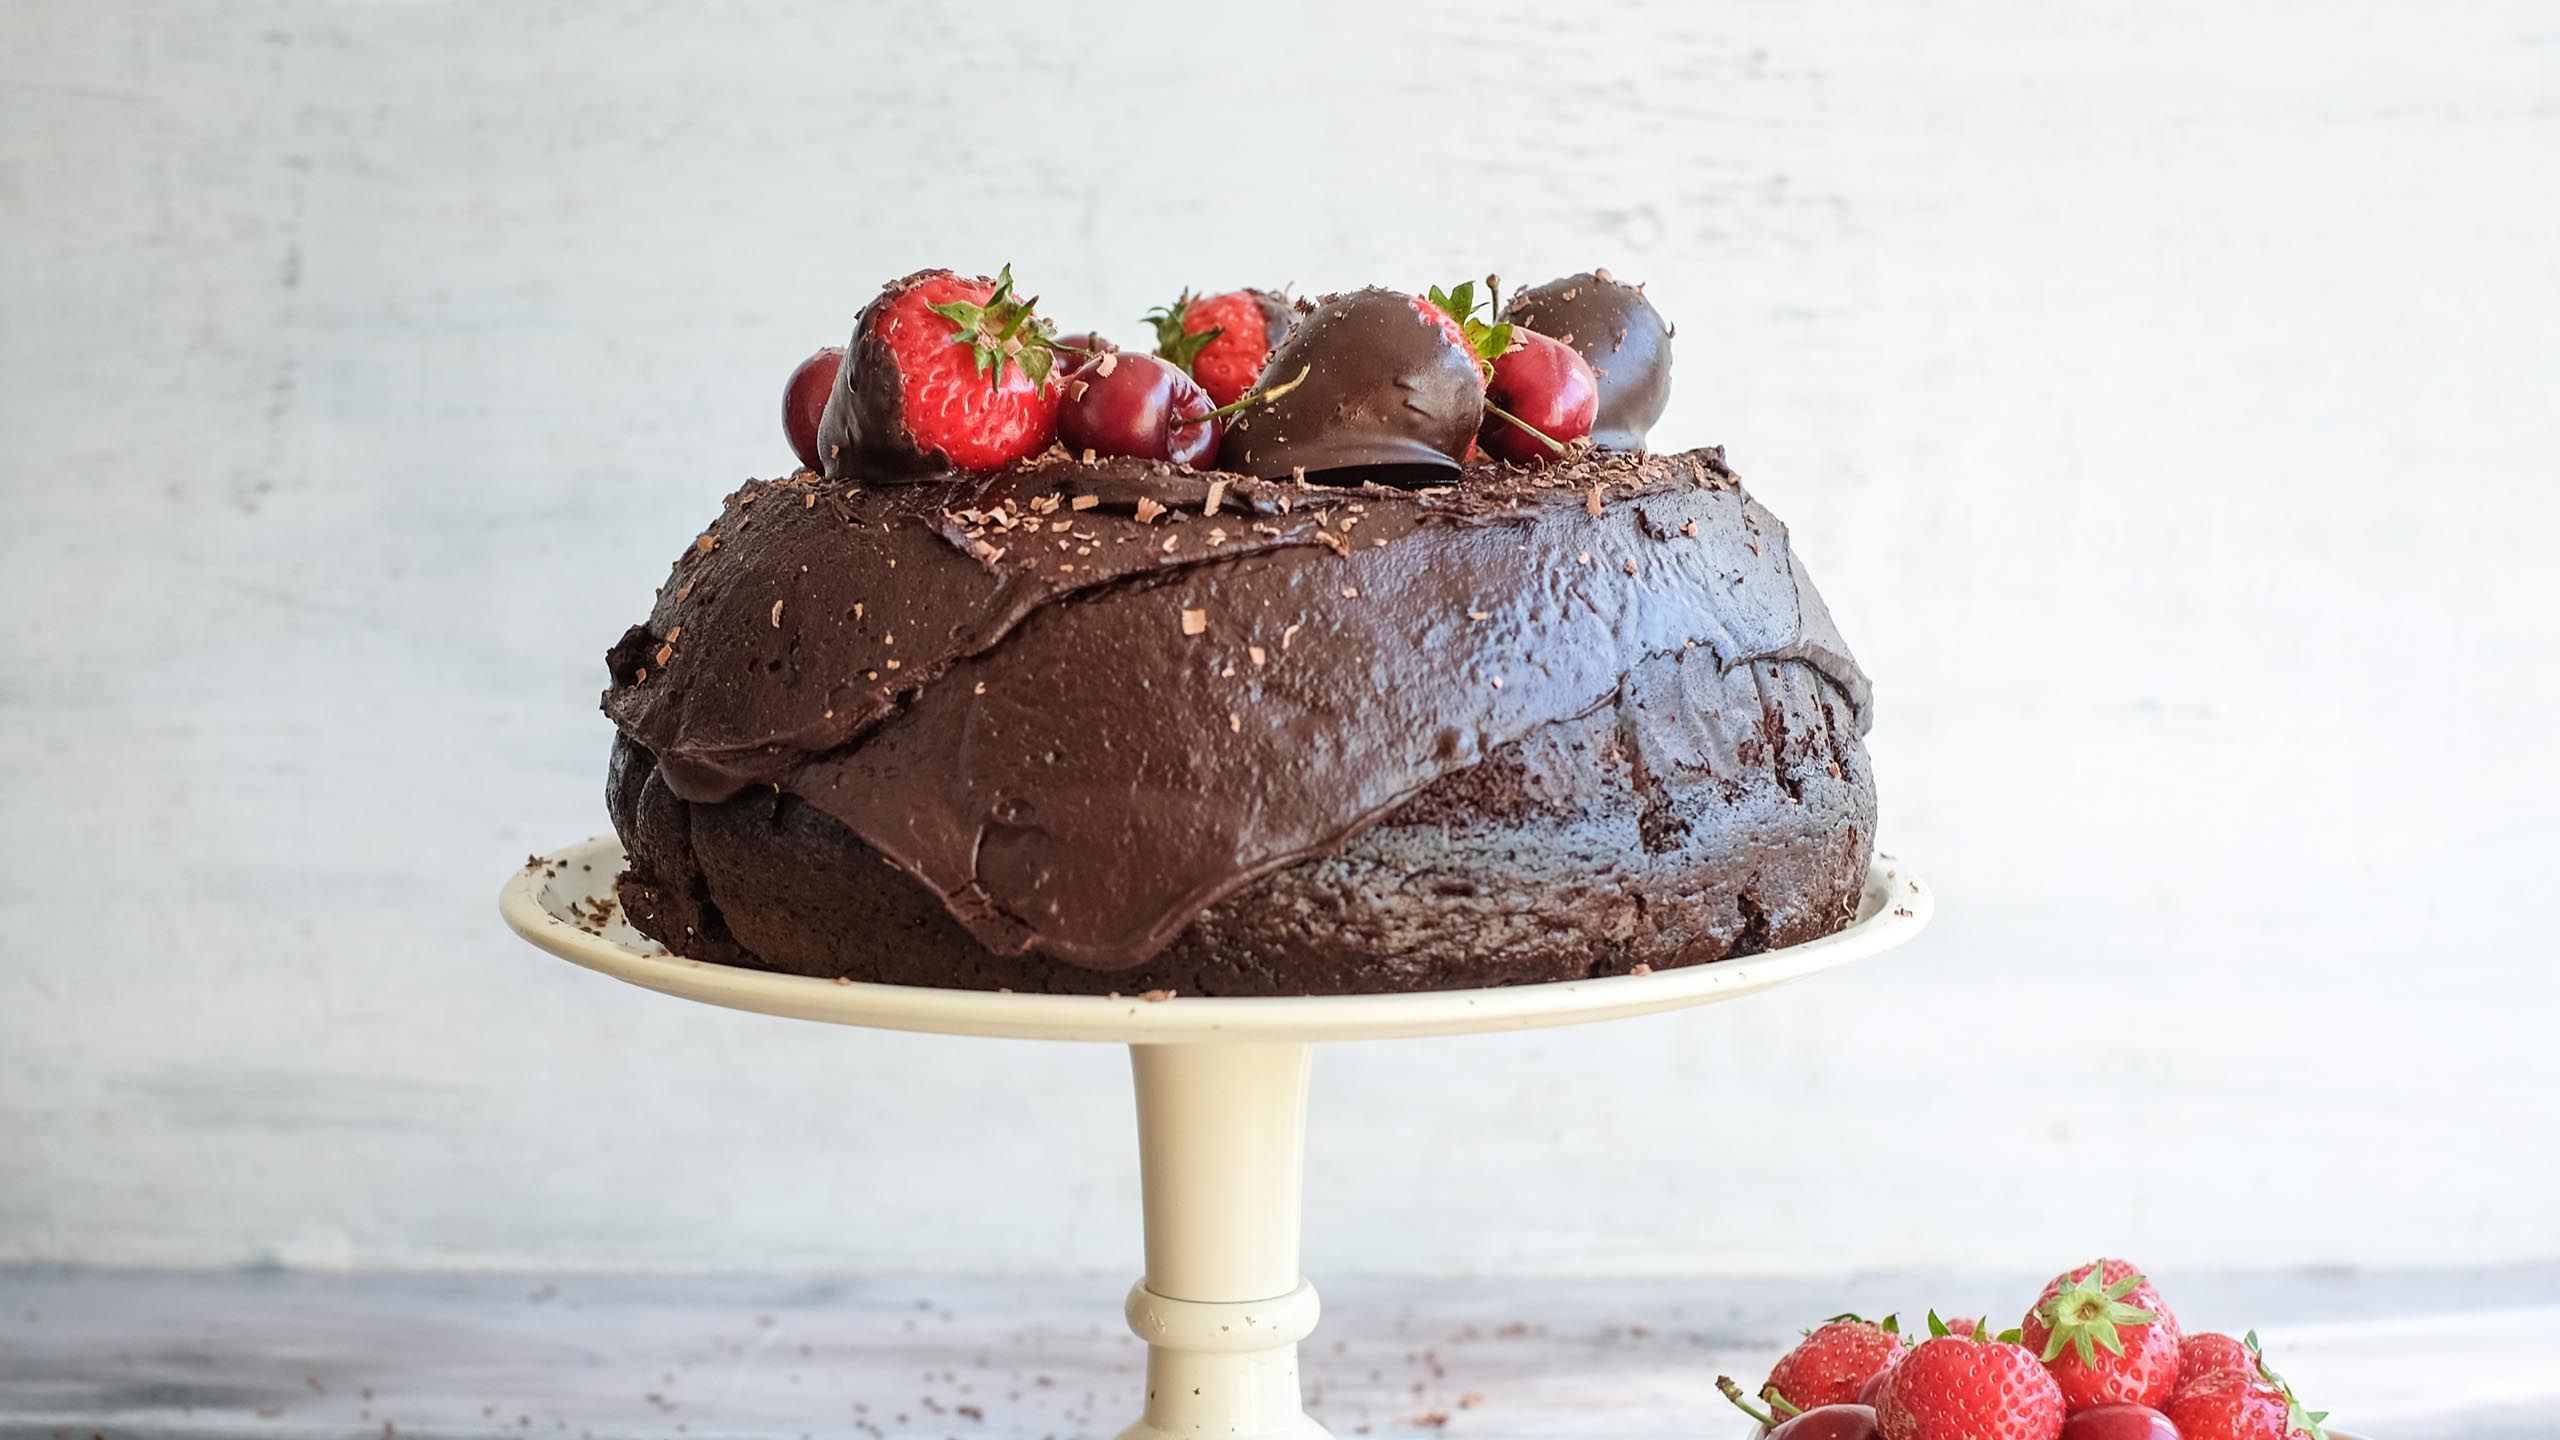 Shands Decidant Chocolate Cake with Strawberries